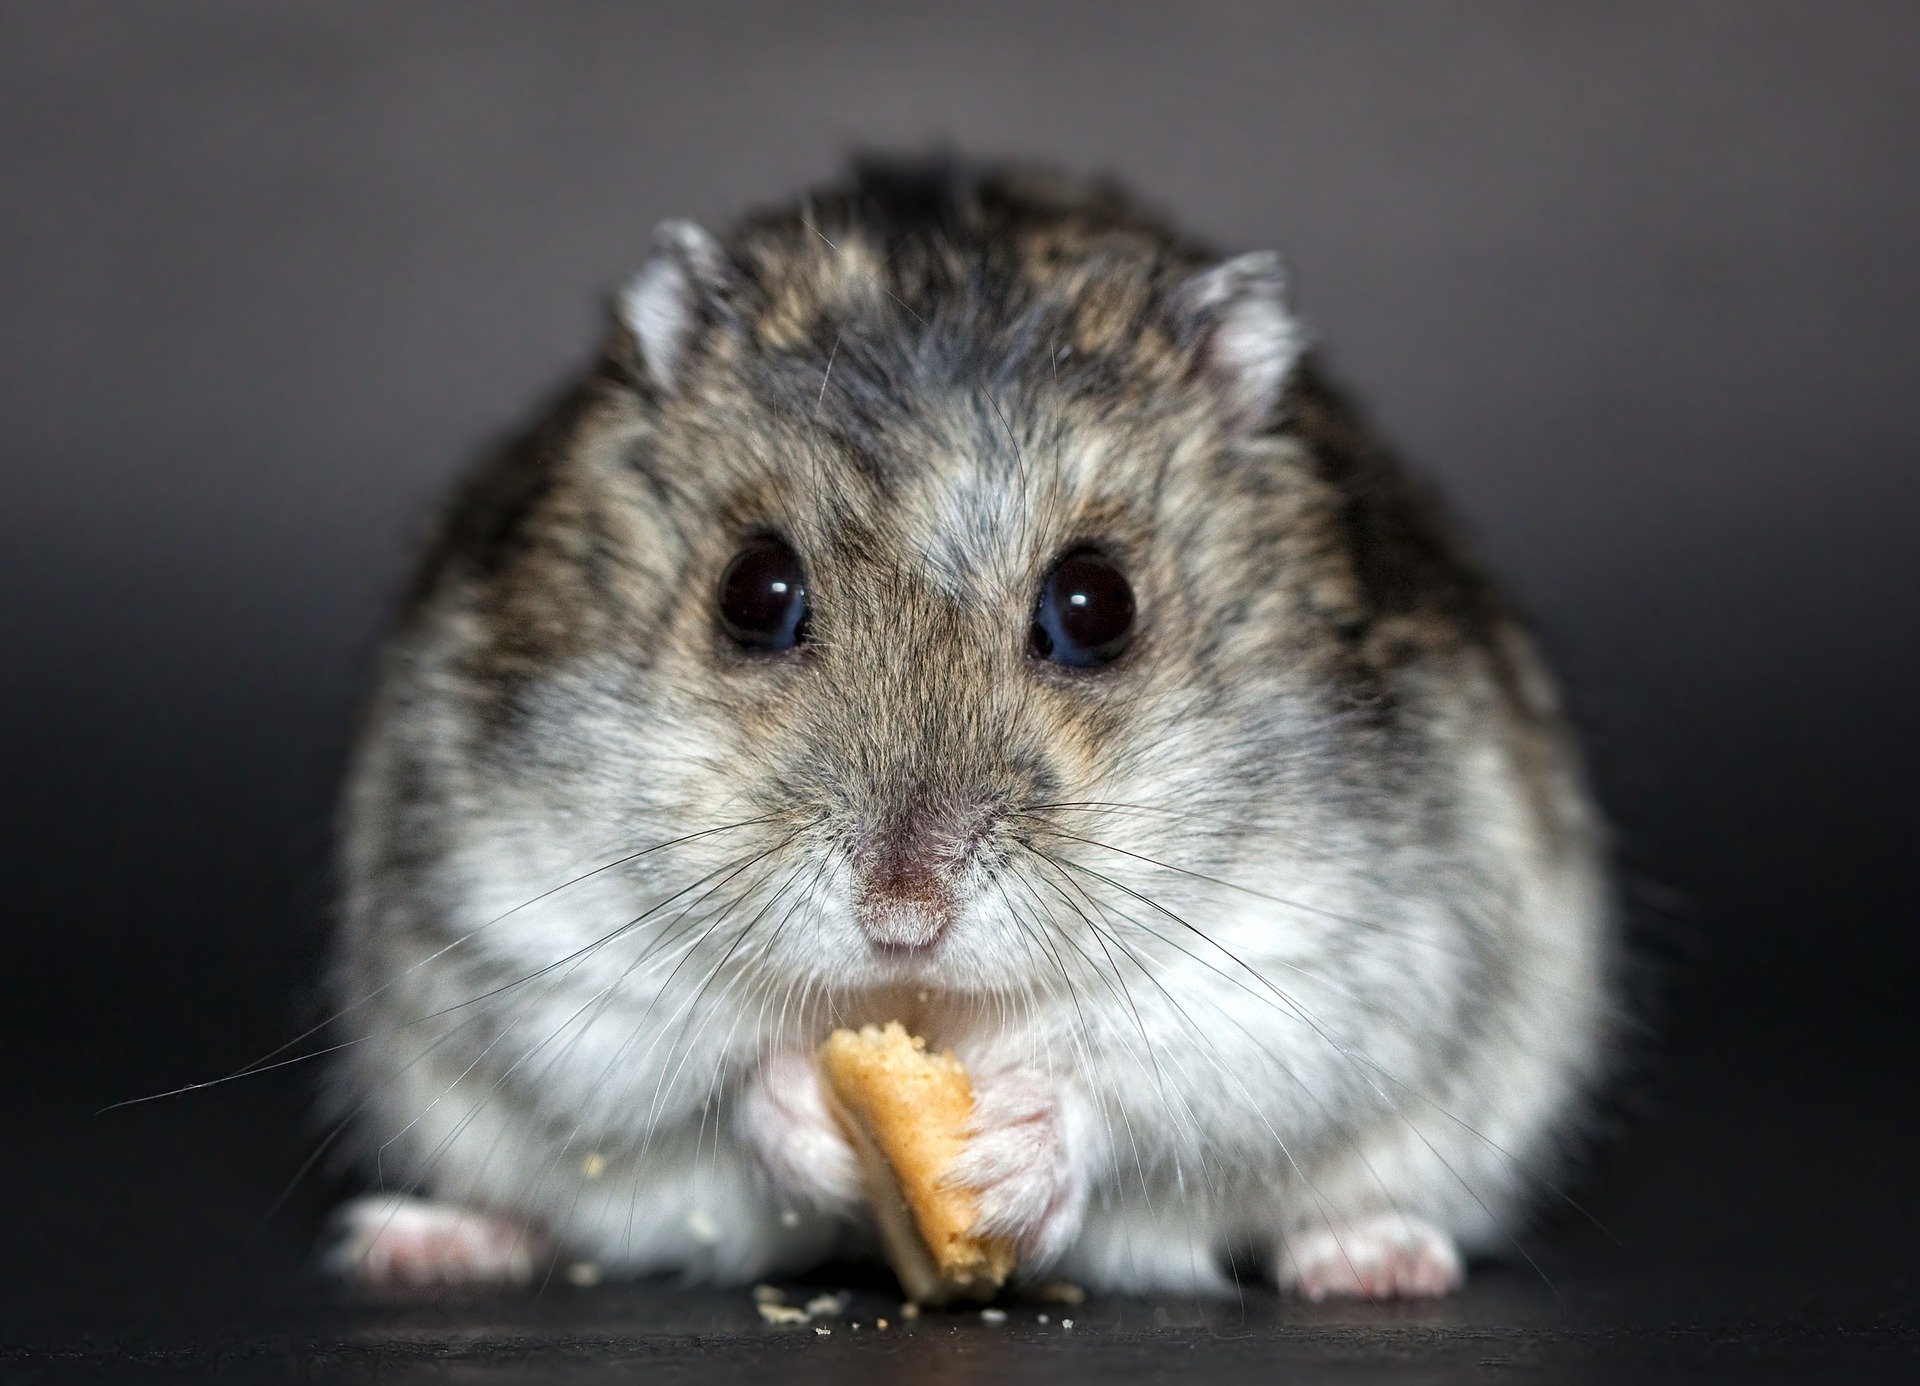 Obesity: hamsters may hold the clue to beating it